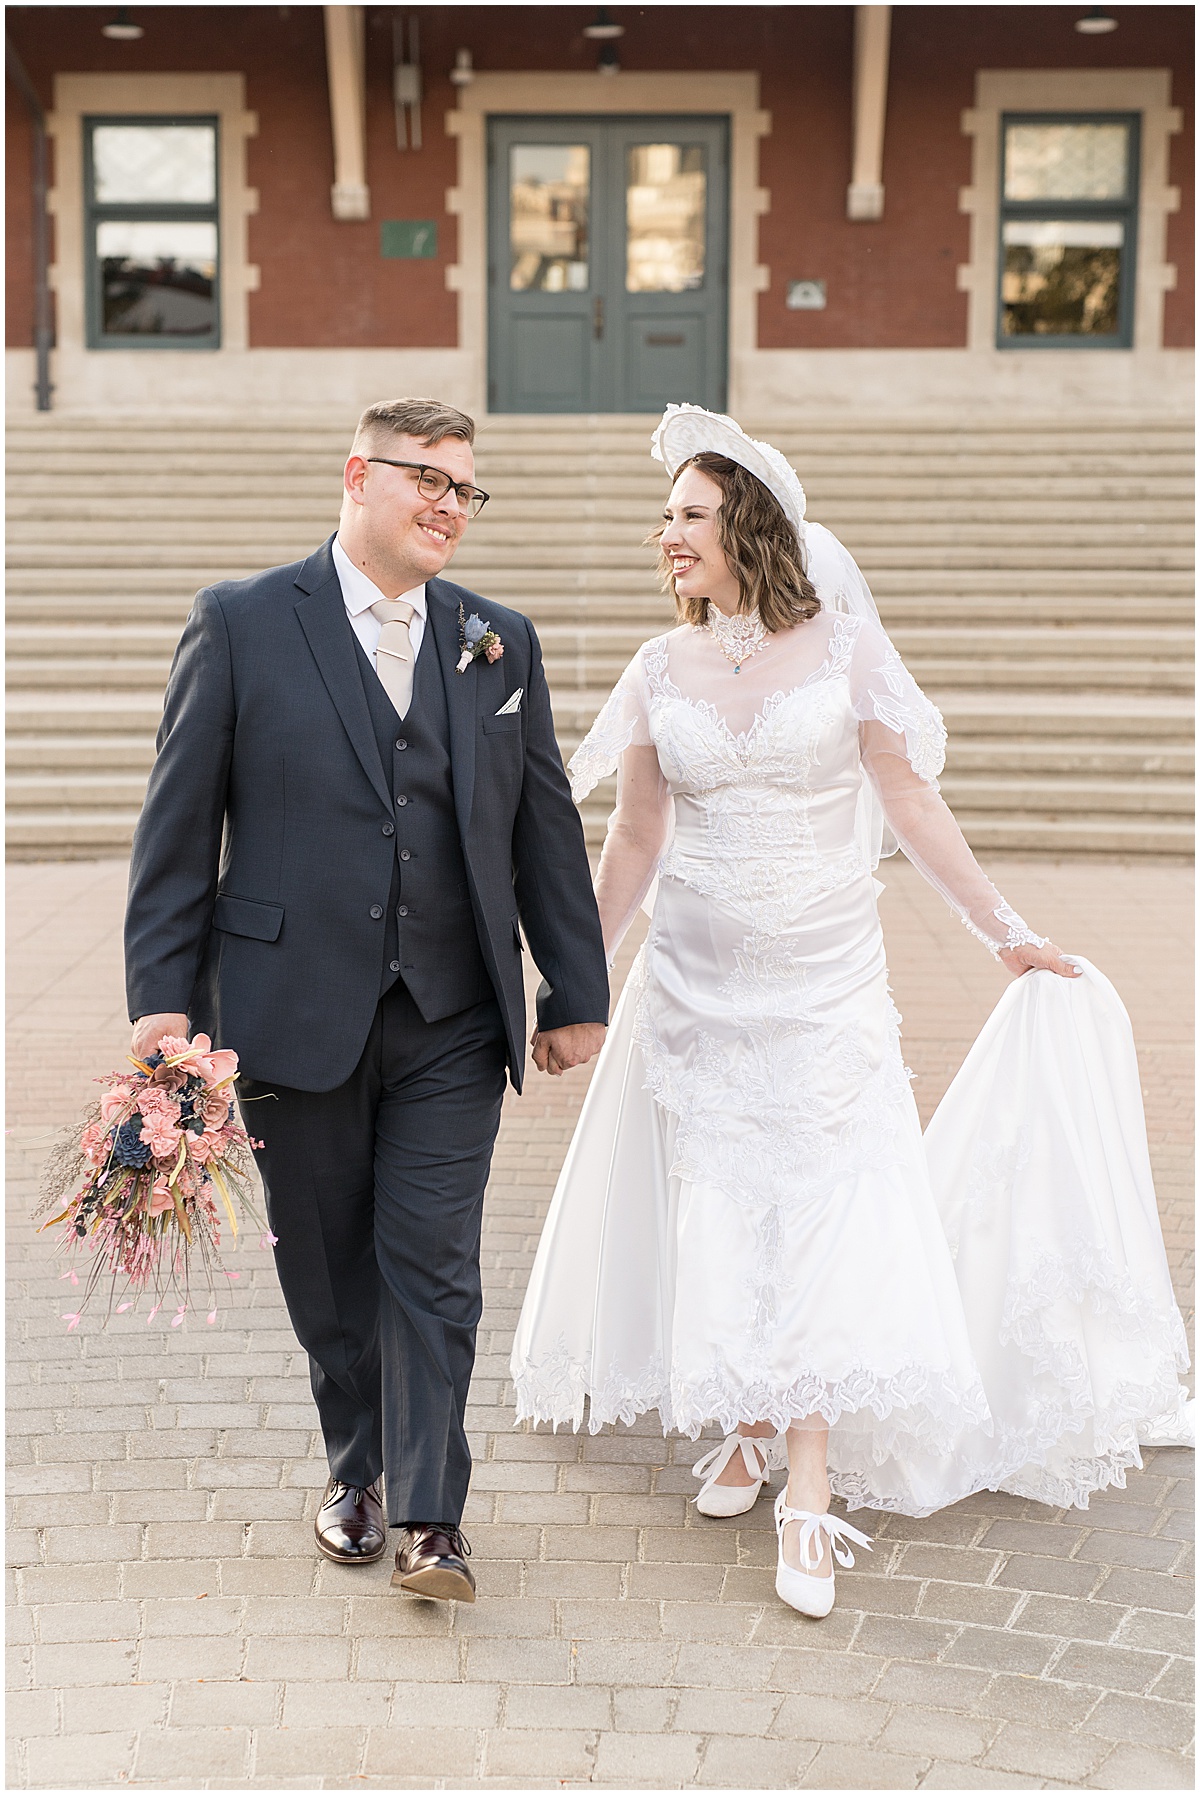 Bride and groom walking in front of train station during wedding photos in Downtown Lafayette, Indiana